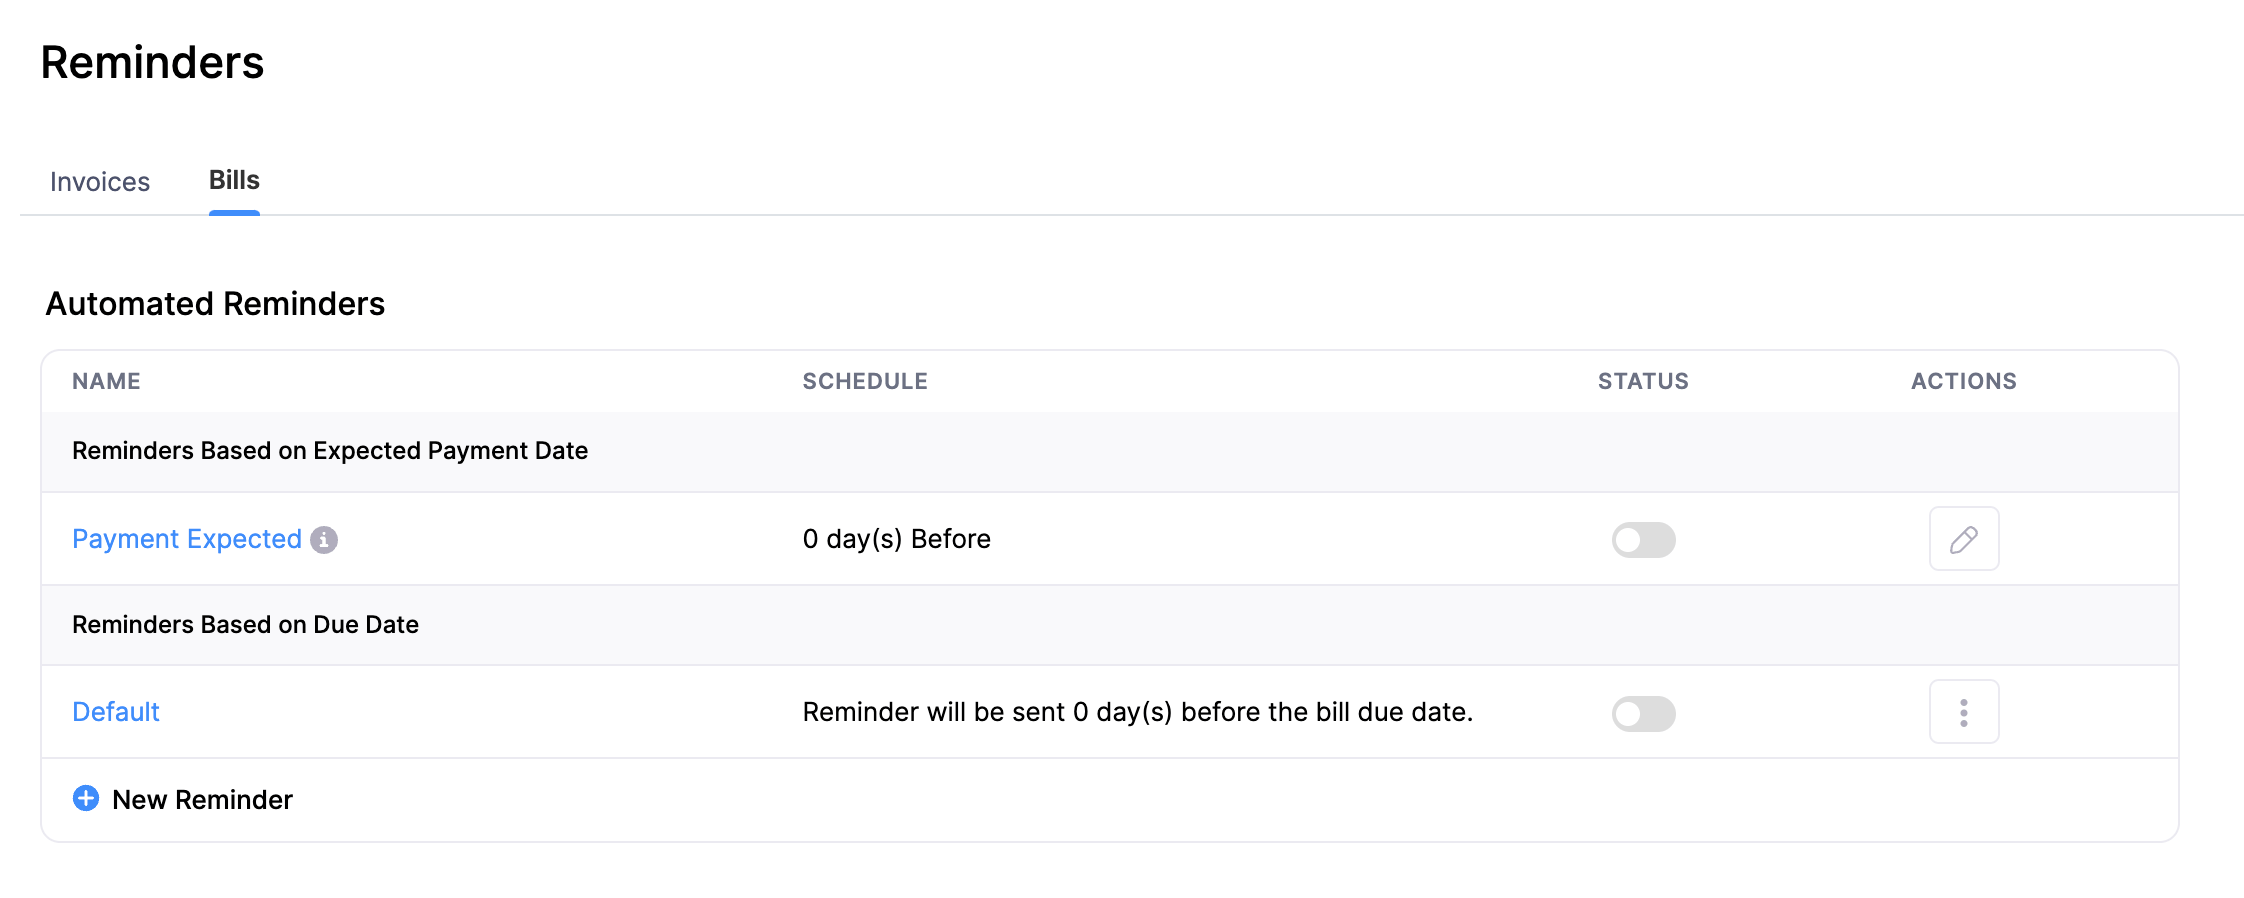 Automated Reminder for Bills